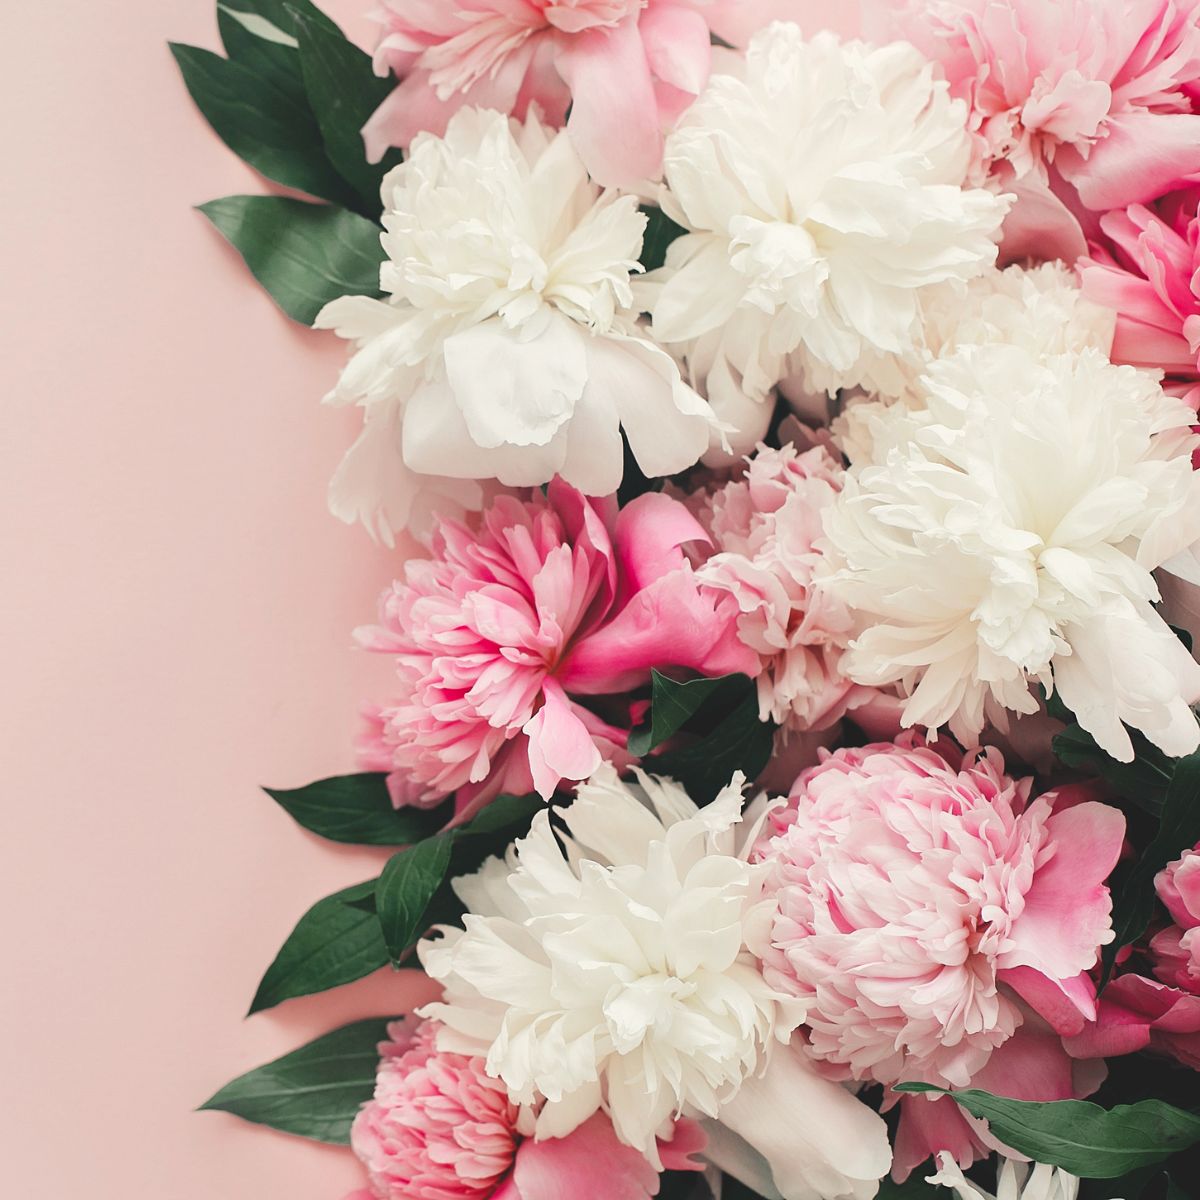 Beautiful white, dark pink and light pink flowers with dark green leaves on a pale pink background